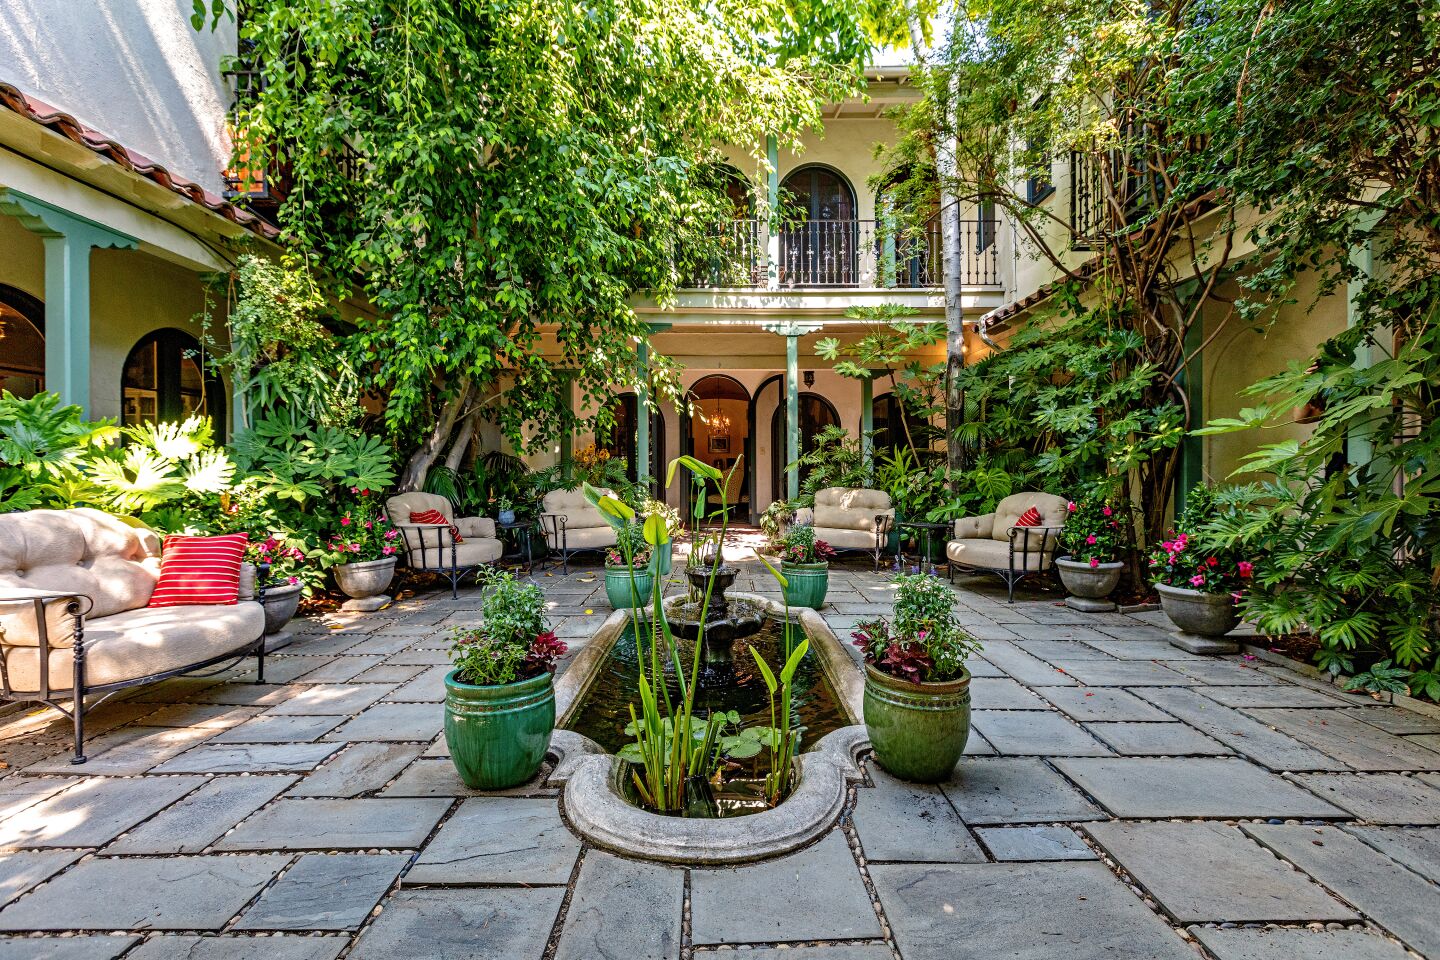 The courtyard with furniture, plants and trees and stone flagstones in front of the house exterior.